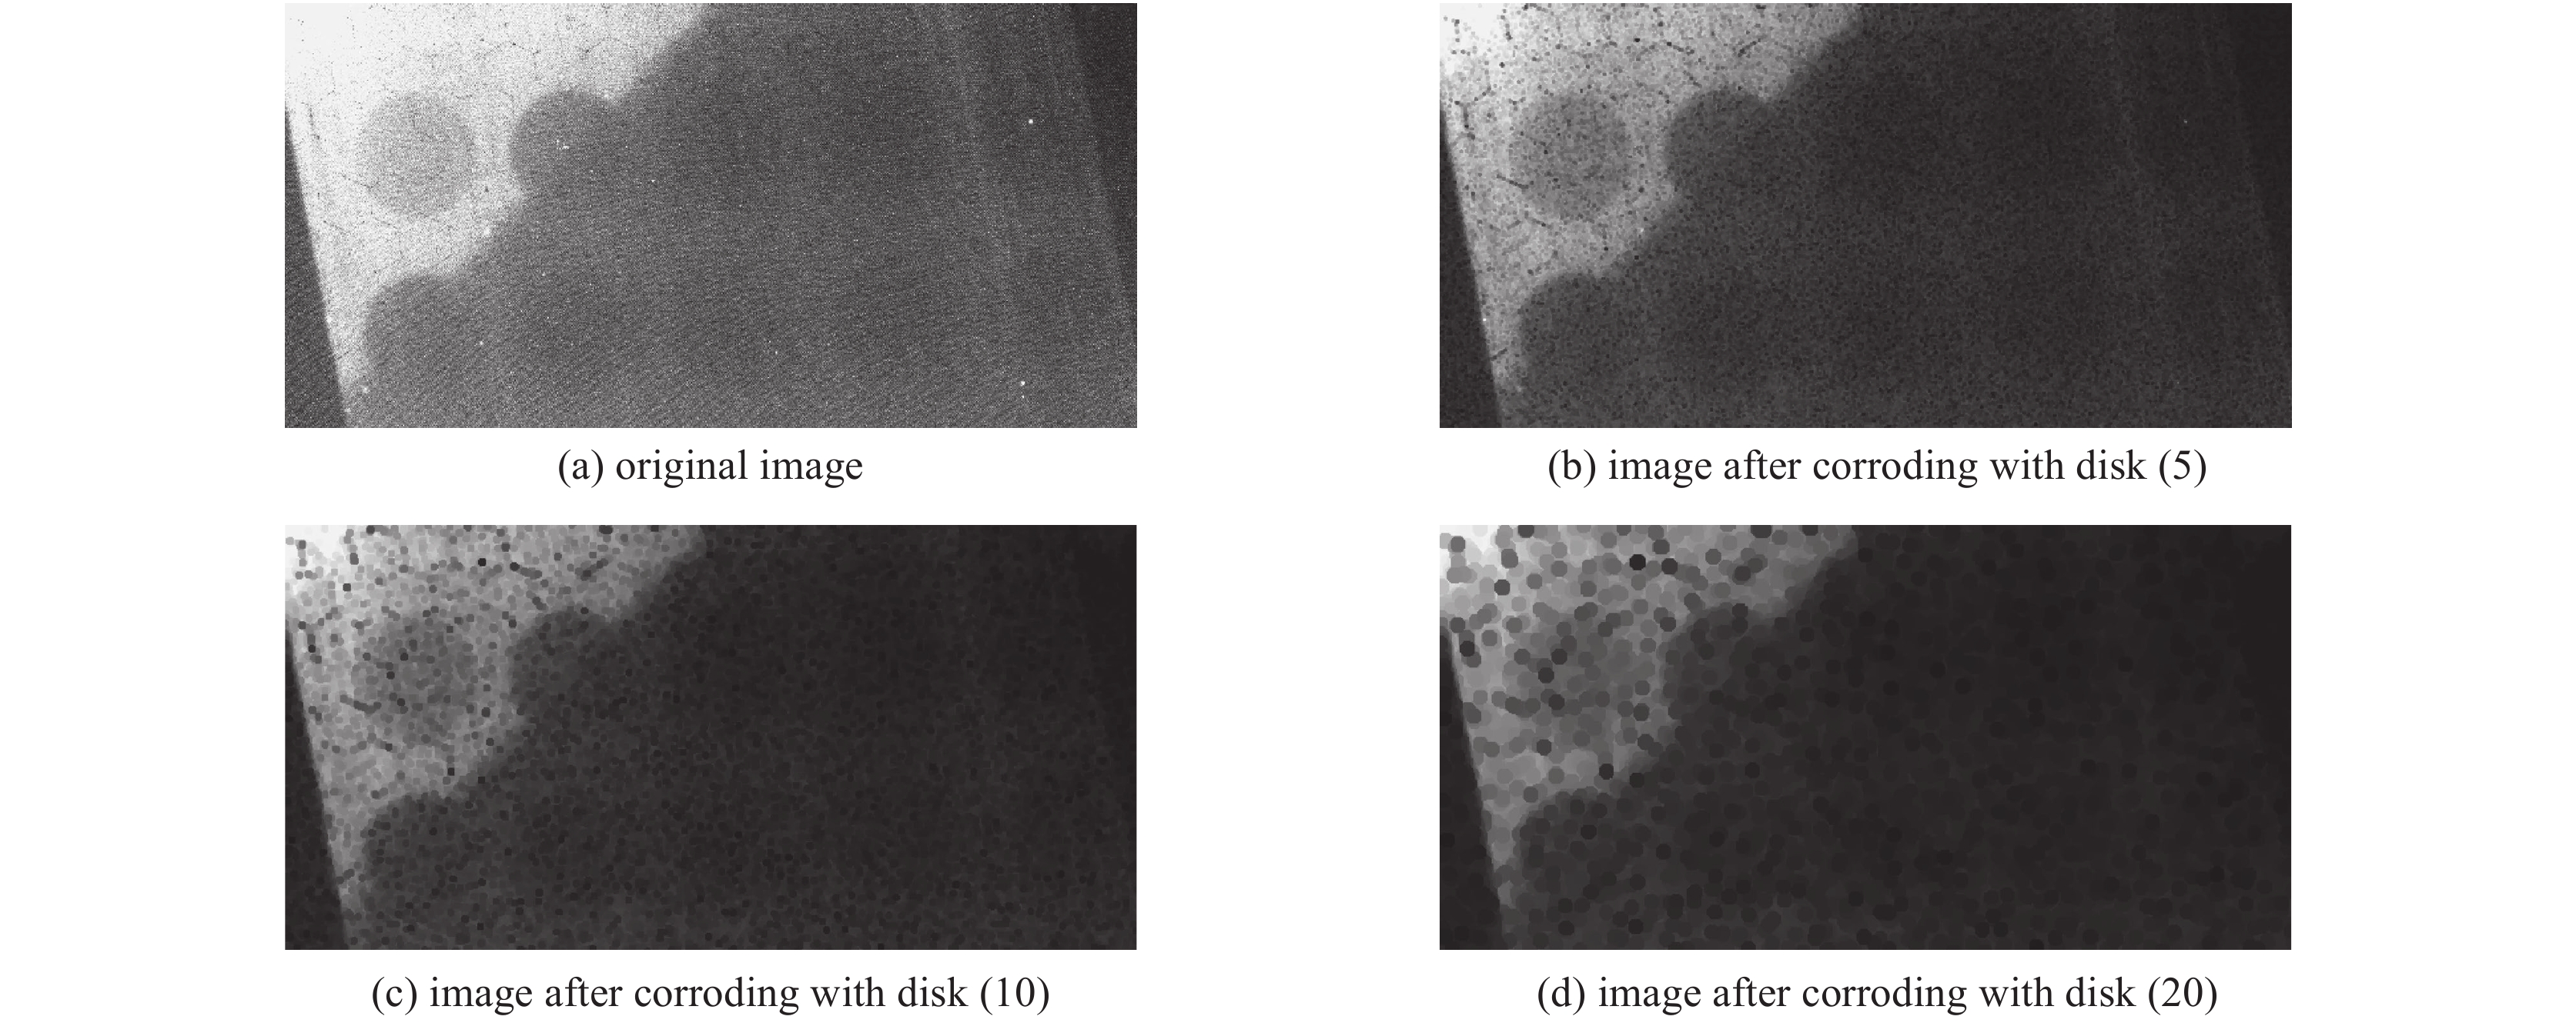 Bremsstrahlung backlit imaging (original image, corrosion of flat disc structure with radius of 5, 10 and 20 pixel respectively)